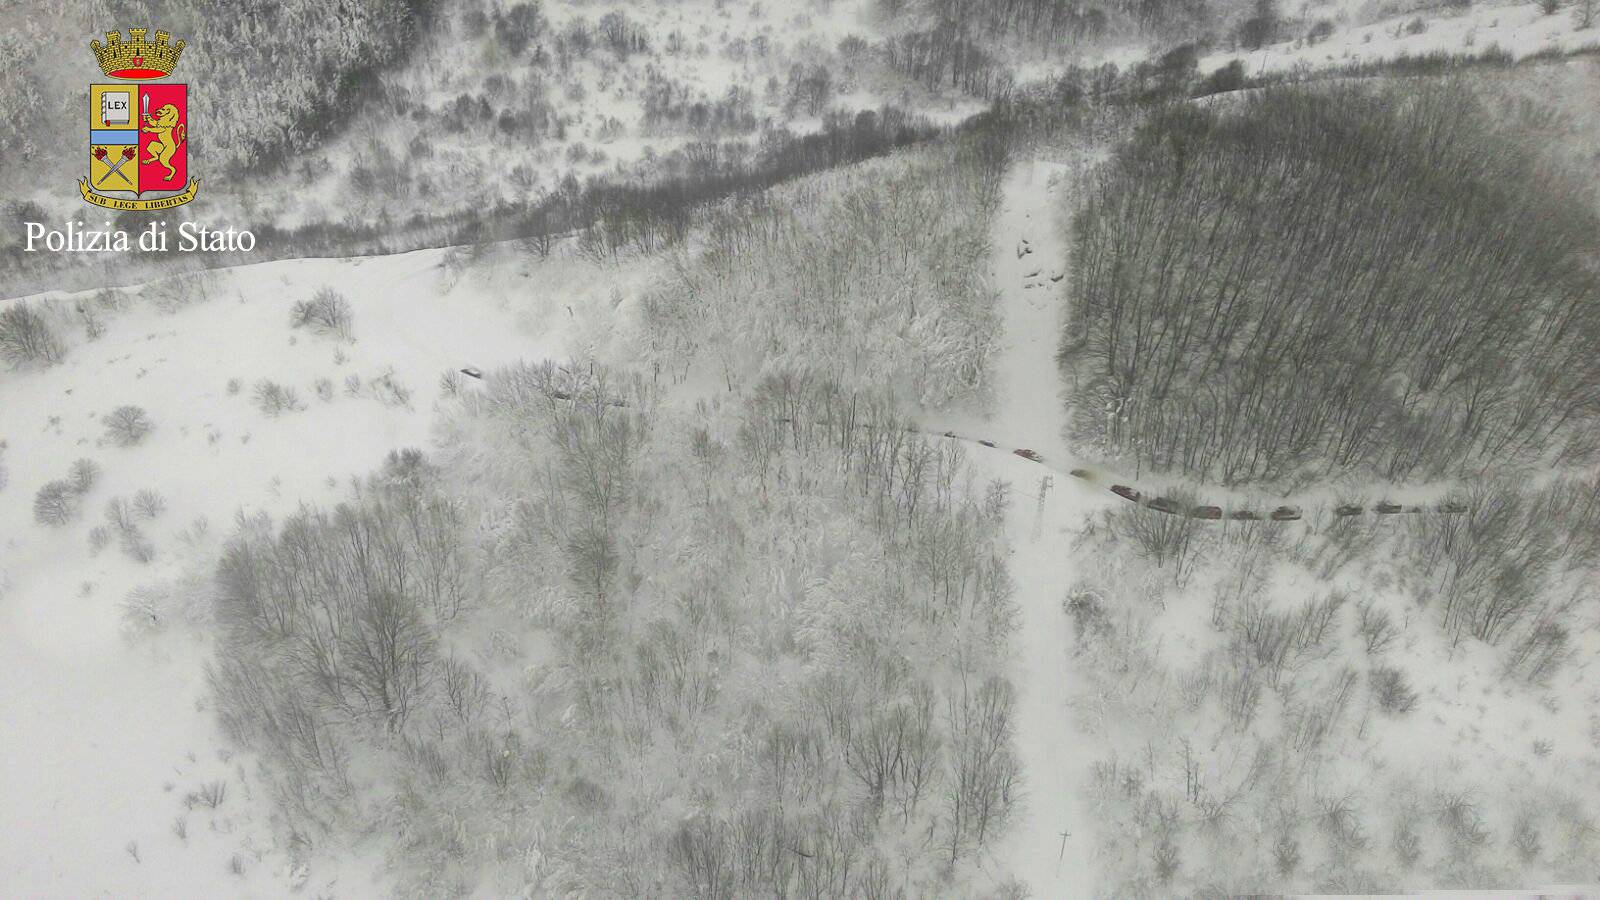 An aerial photo shows the rescuers heading to Hotel Rigopiano in Farindola, central Italy, hit by an avalanche.